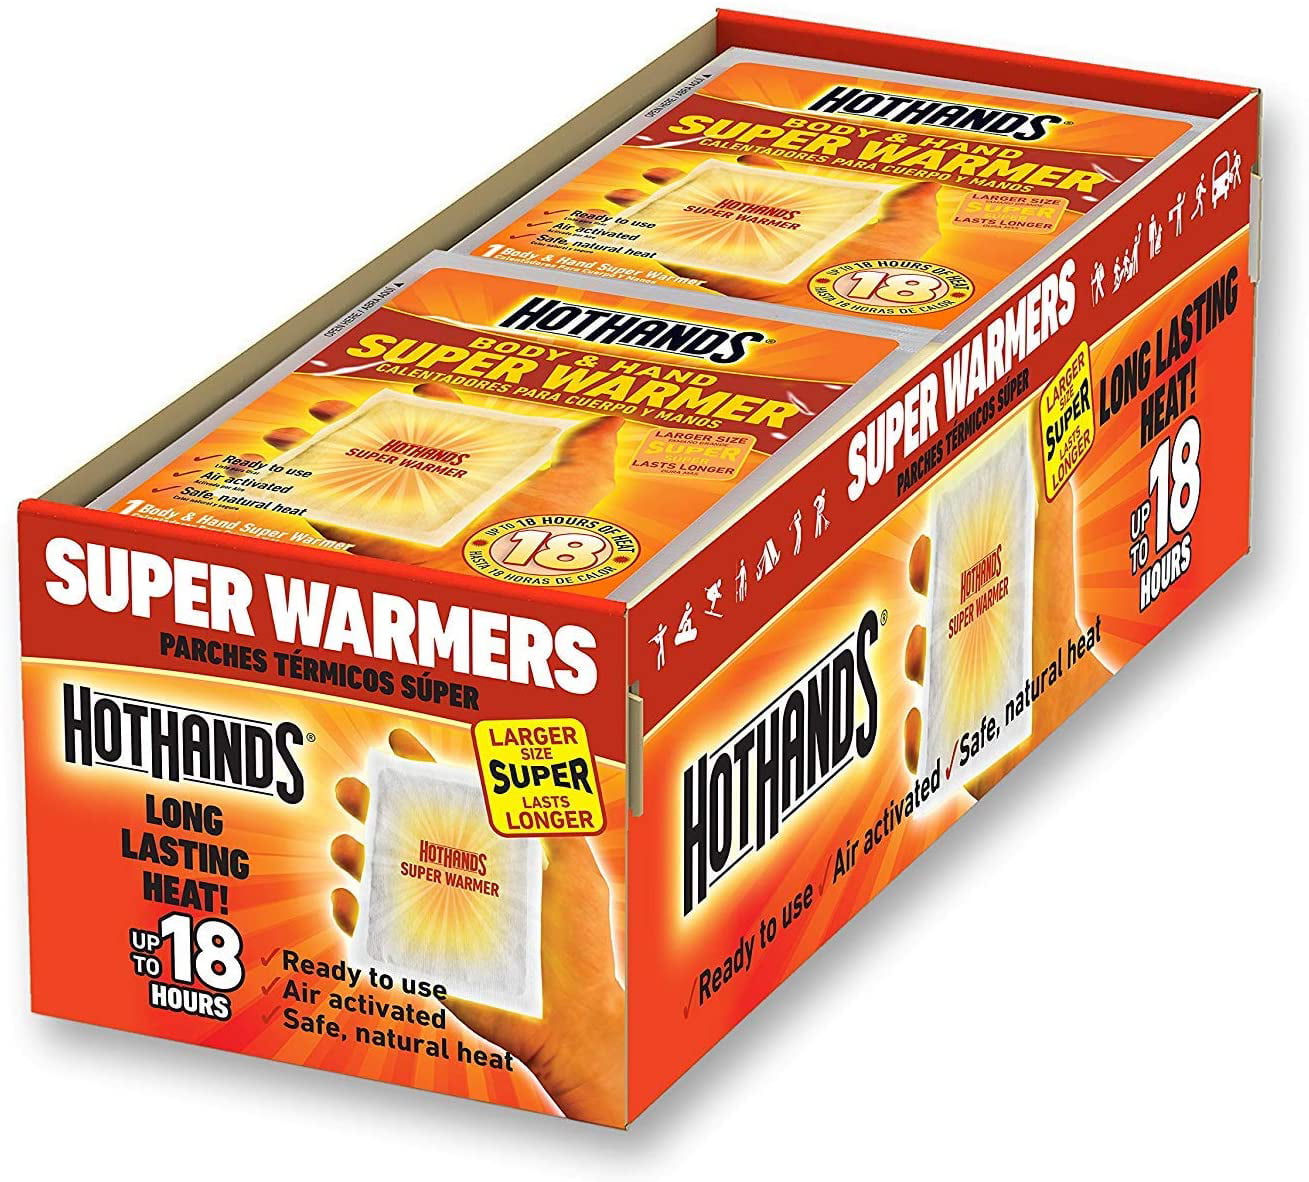 Up to 18 Hours of Heat 40 Individual Warmers Body & Hand Super Warmers Long Lasting Safe Natural Odorless Air Activated Warmers 